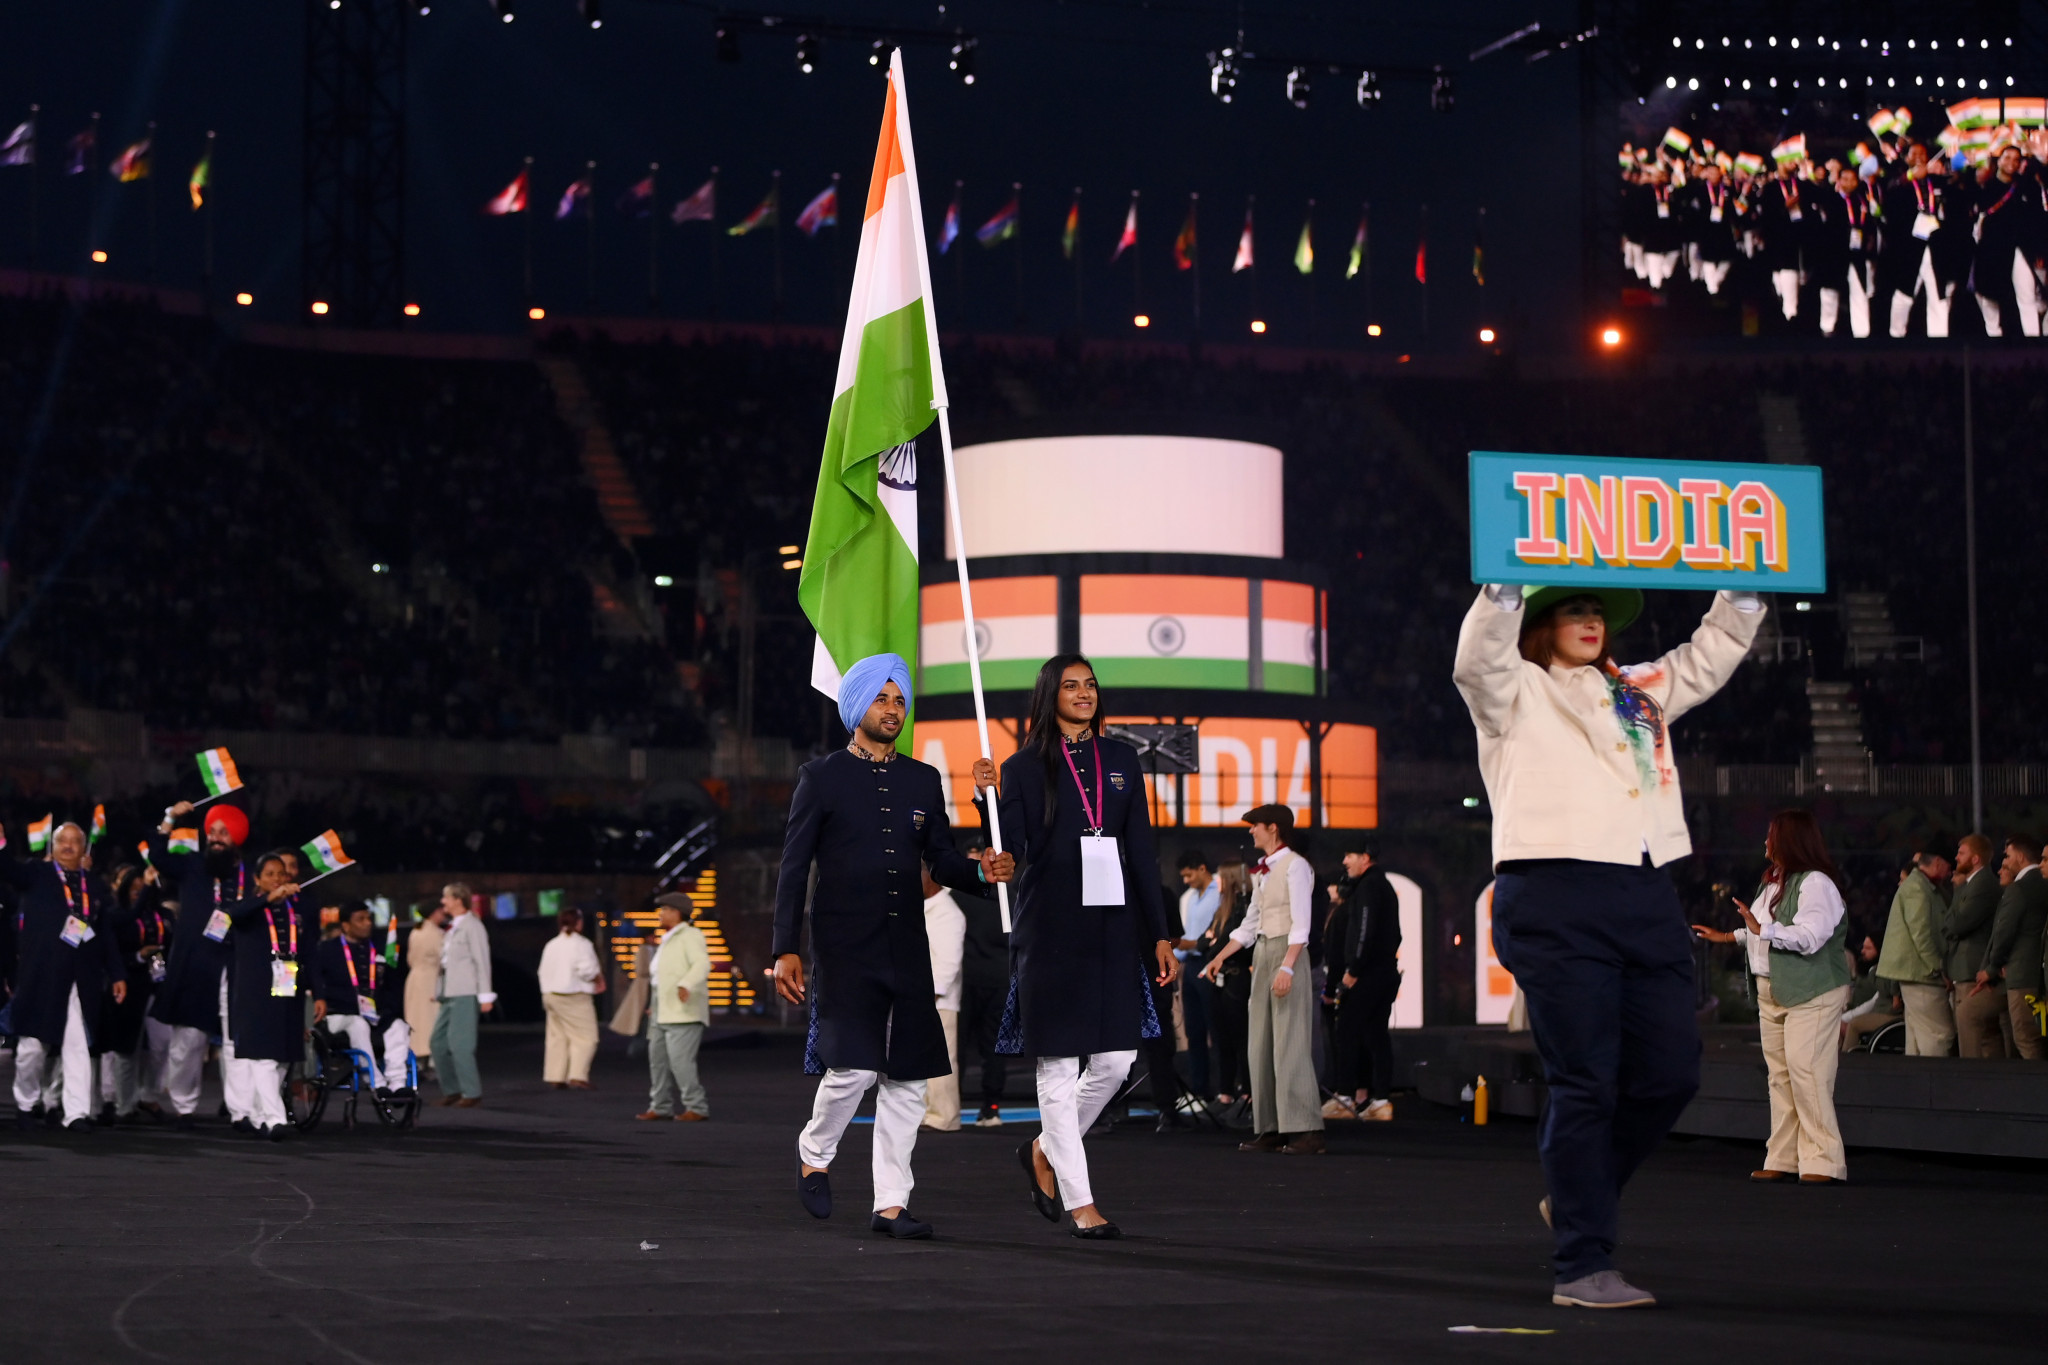 IOA to host first-ever India House at Paris 2024 after deal with Reliance 